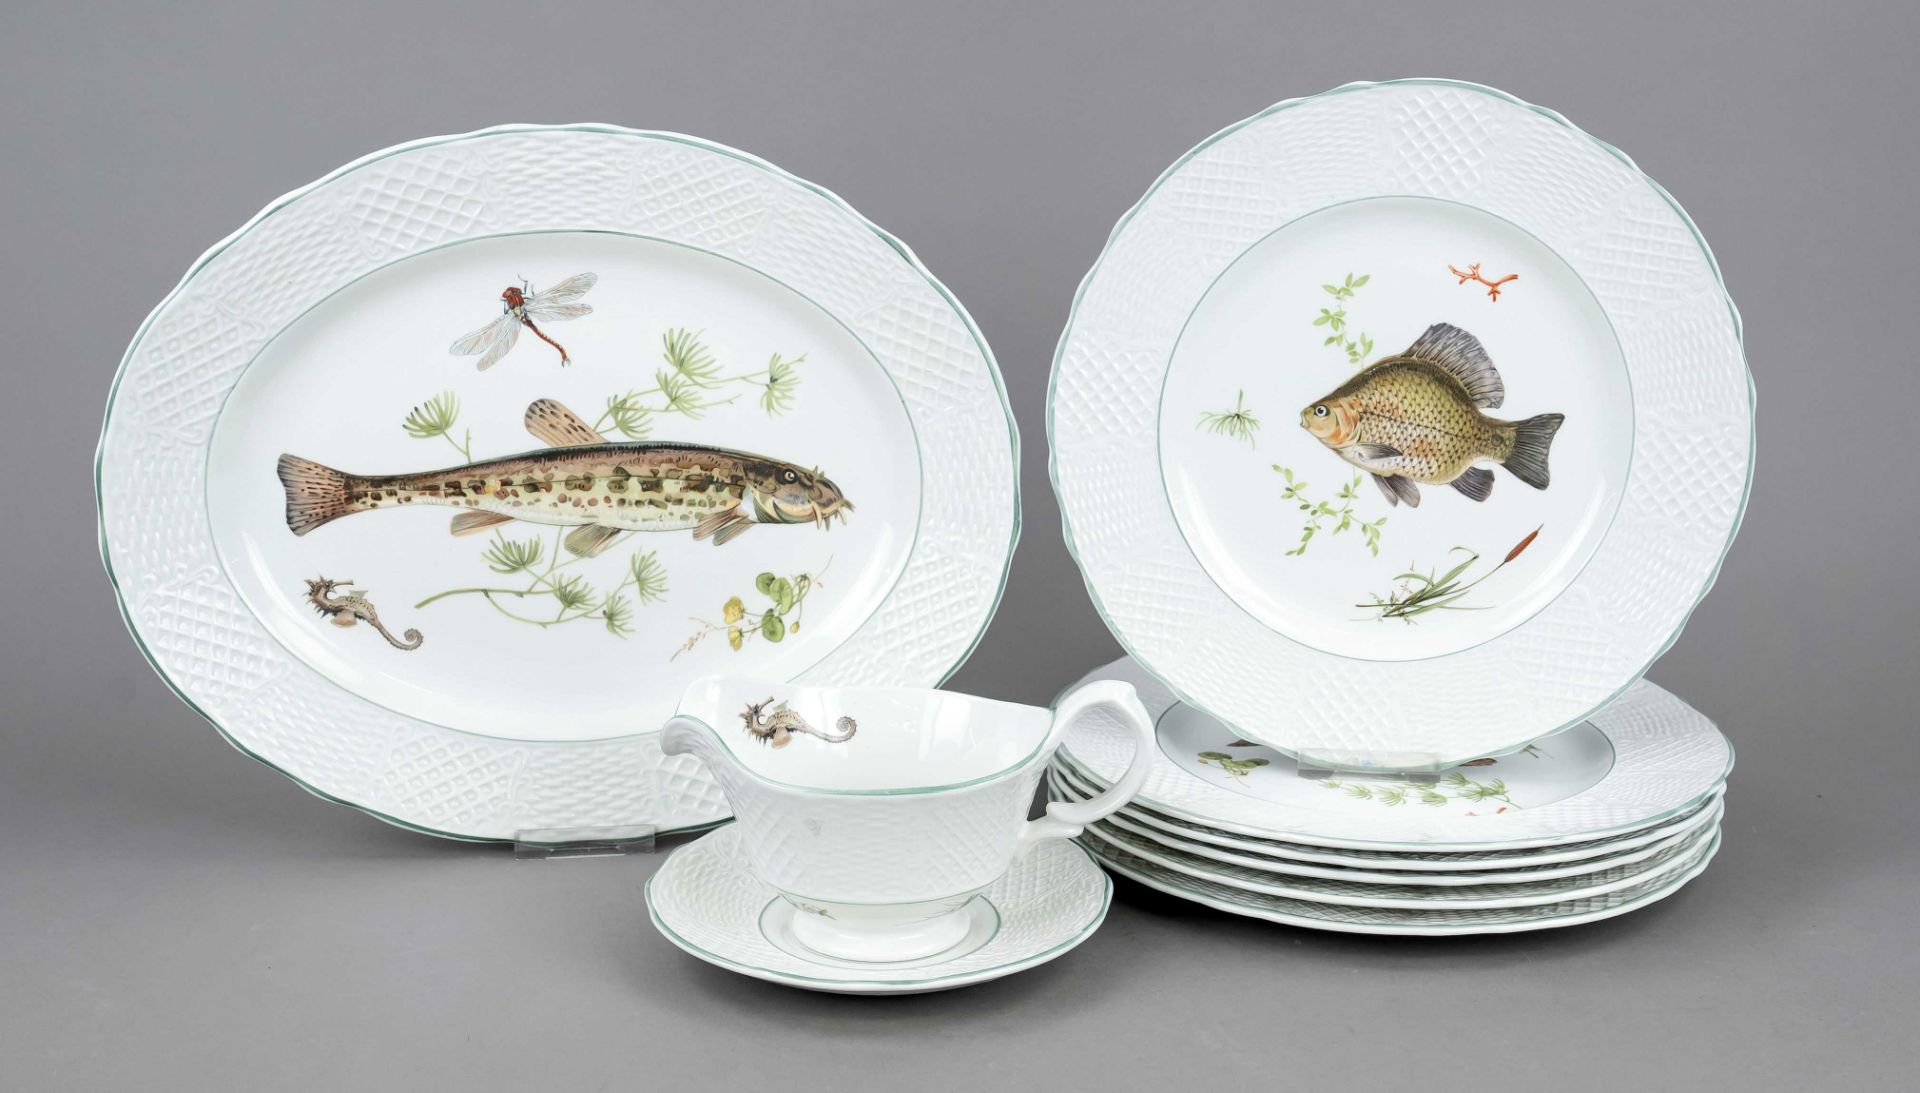 Fish service for 6 persons, 9 pieces, ceramic, Marlborough Old English Ironstone By Simpsons Potter,